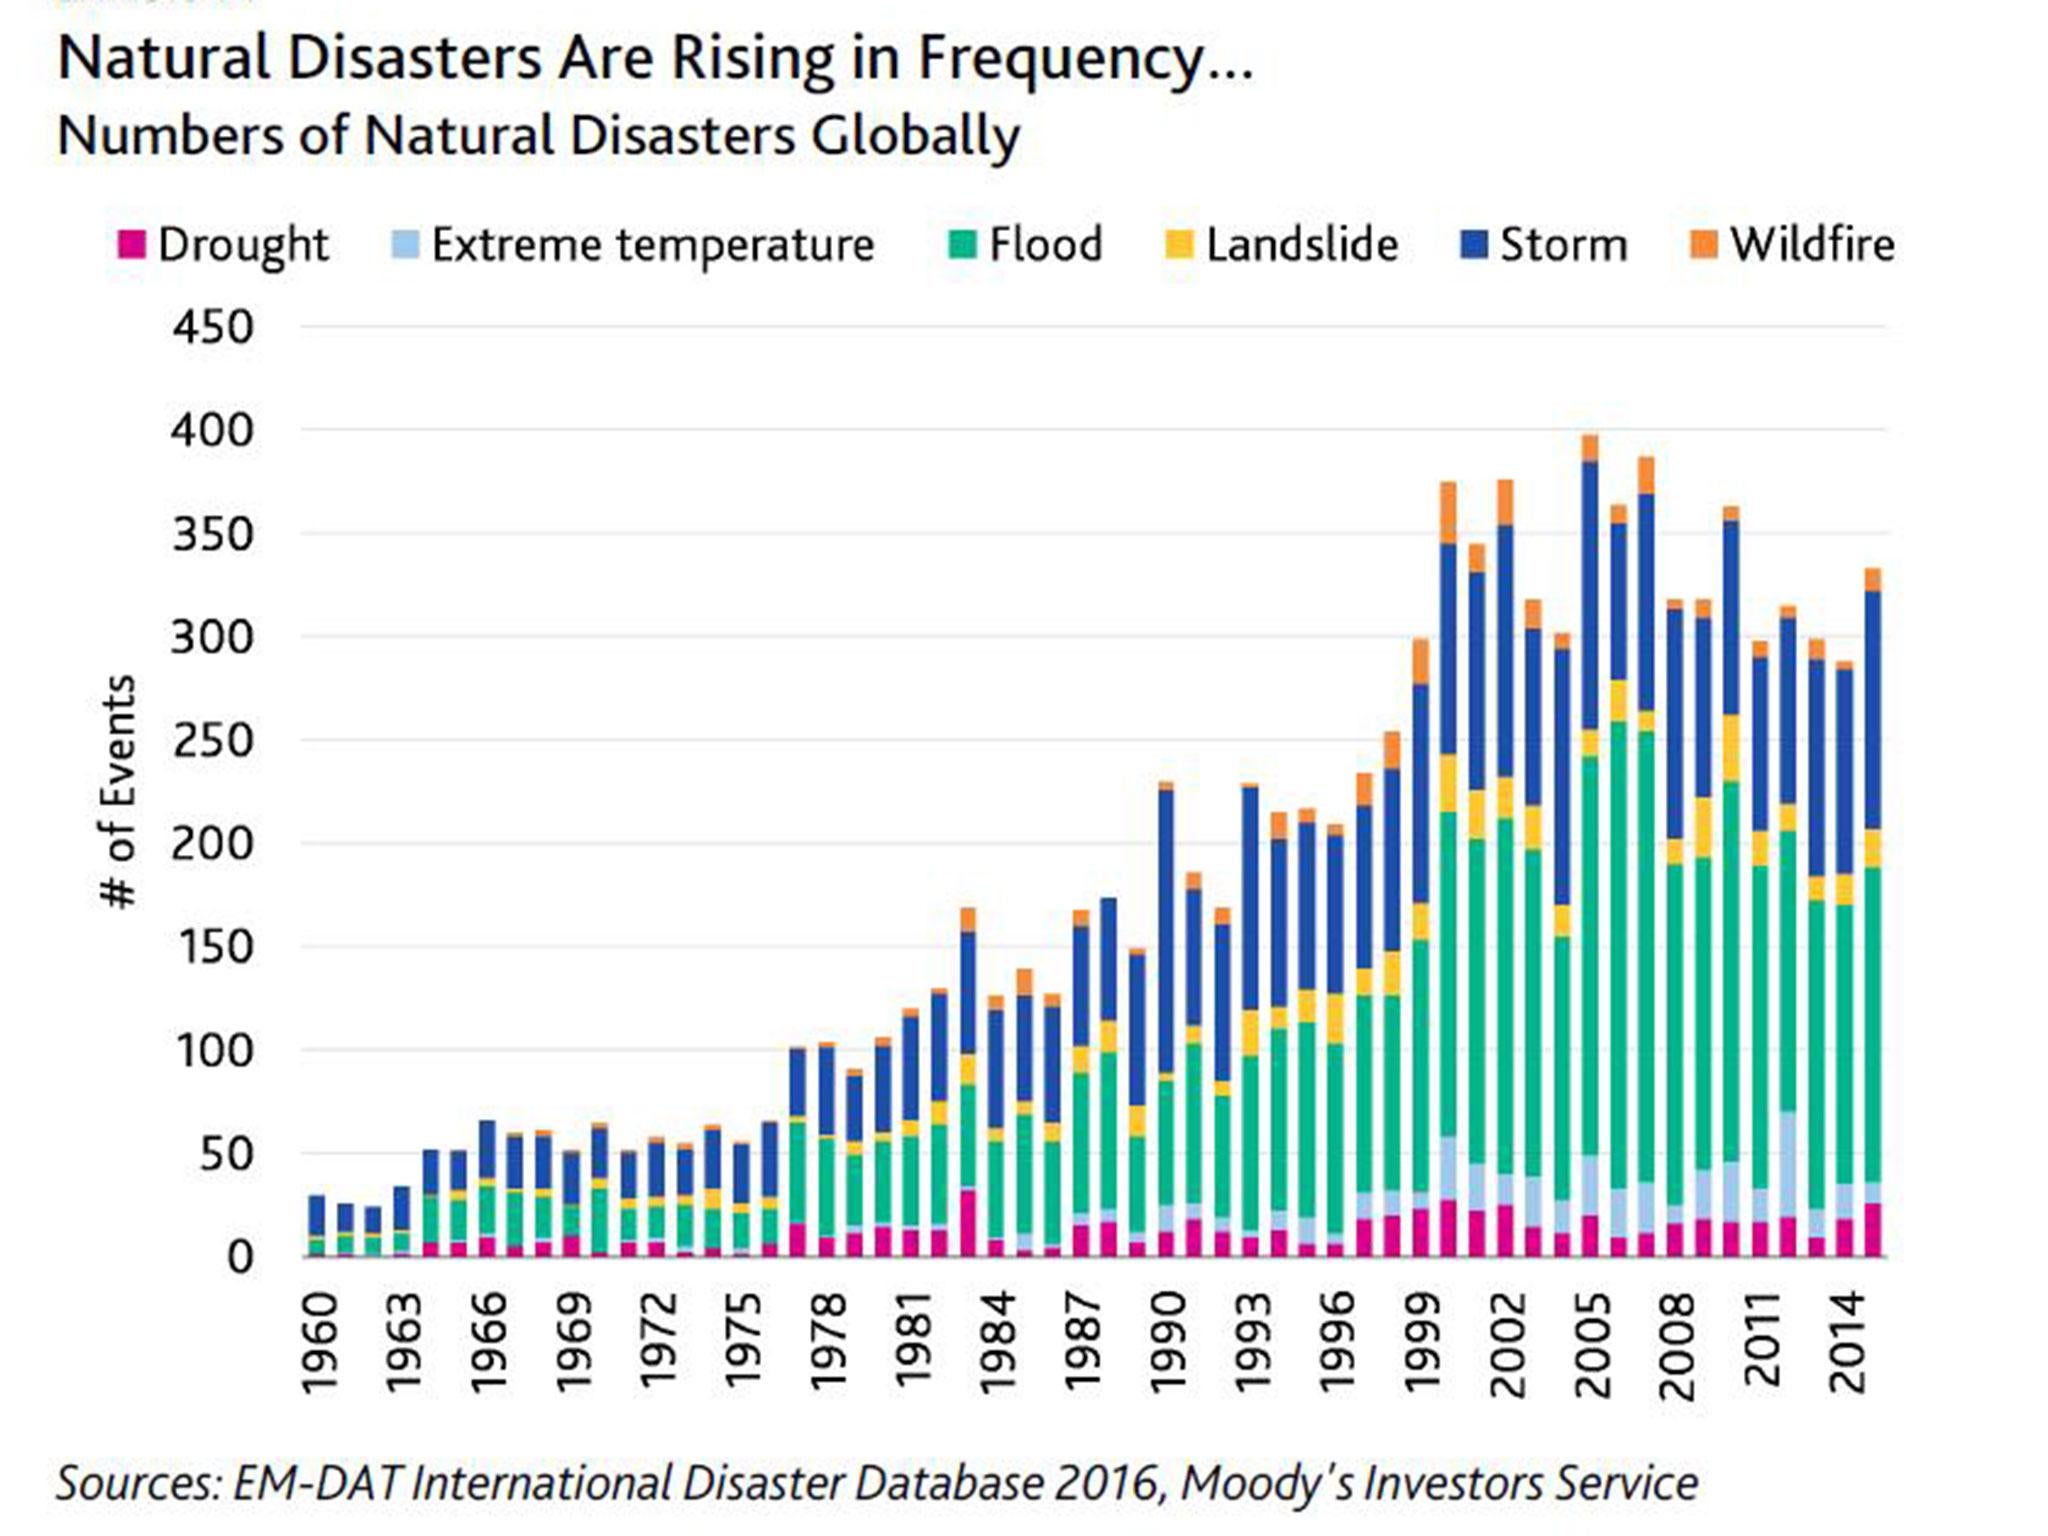 The increase in the number of natural disasters worldwide since 1960